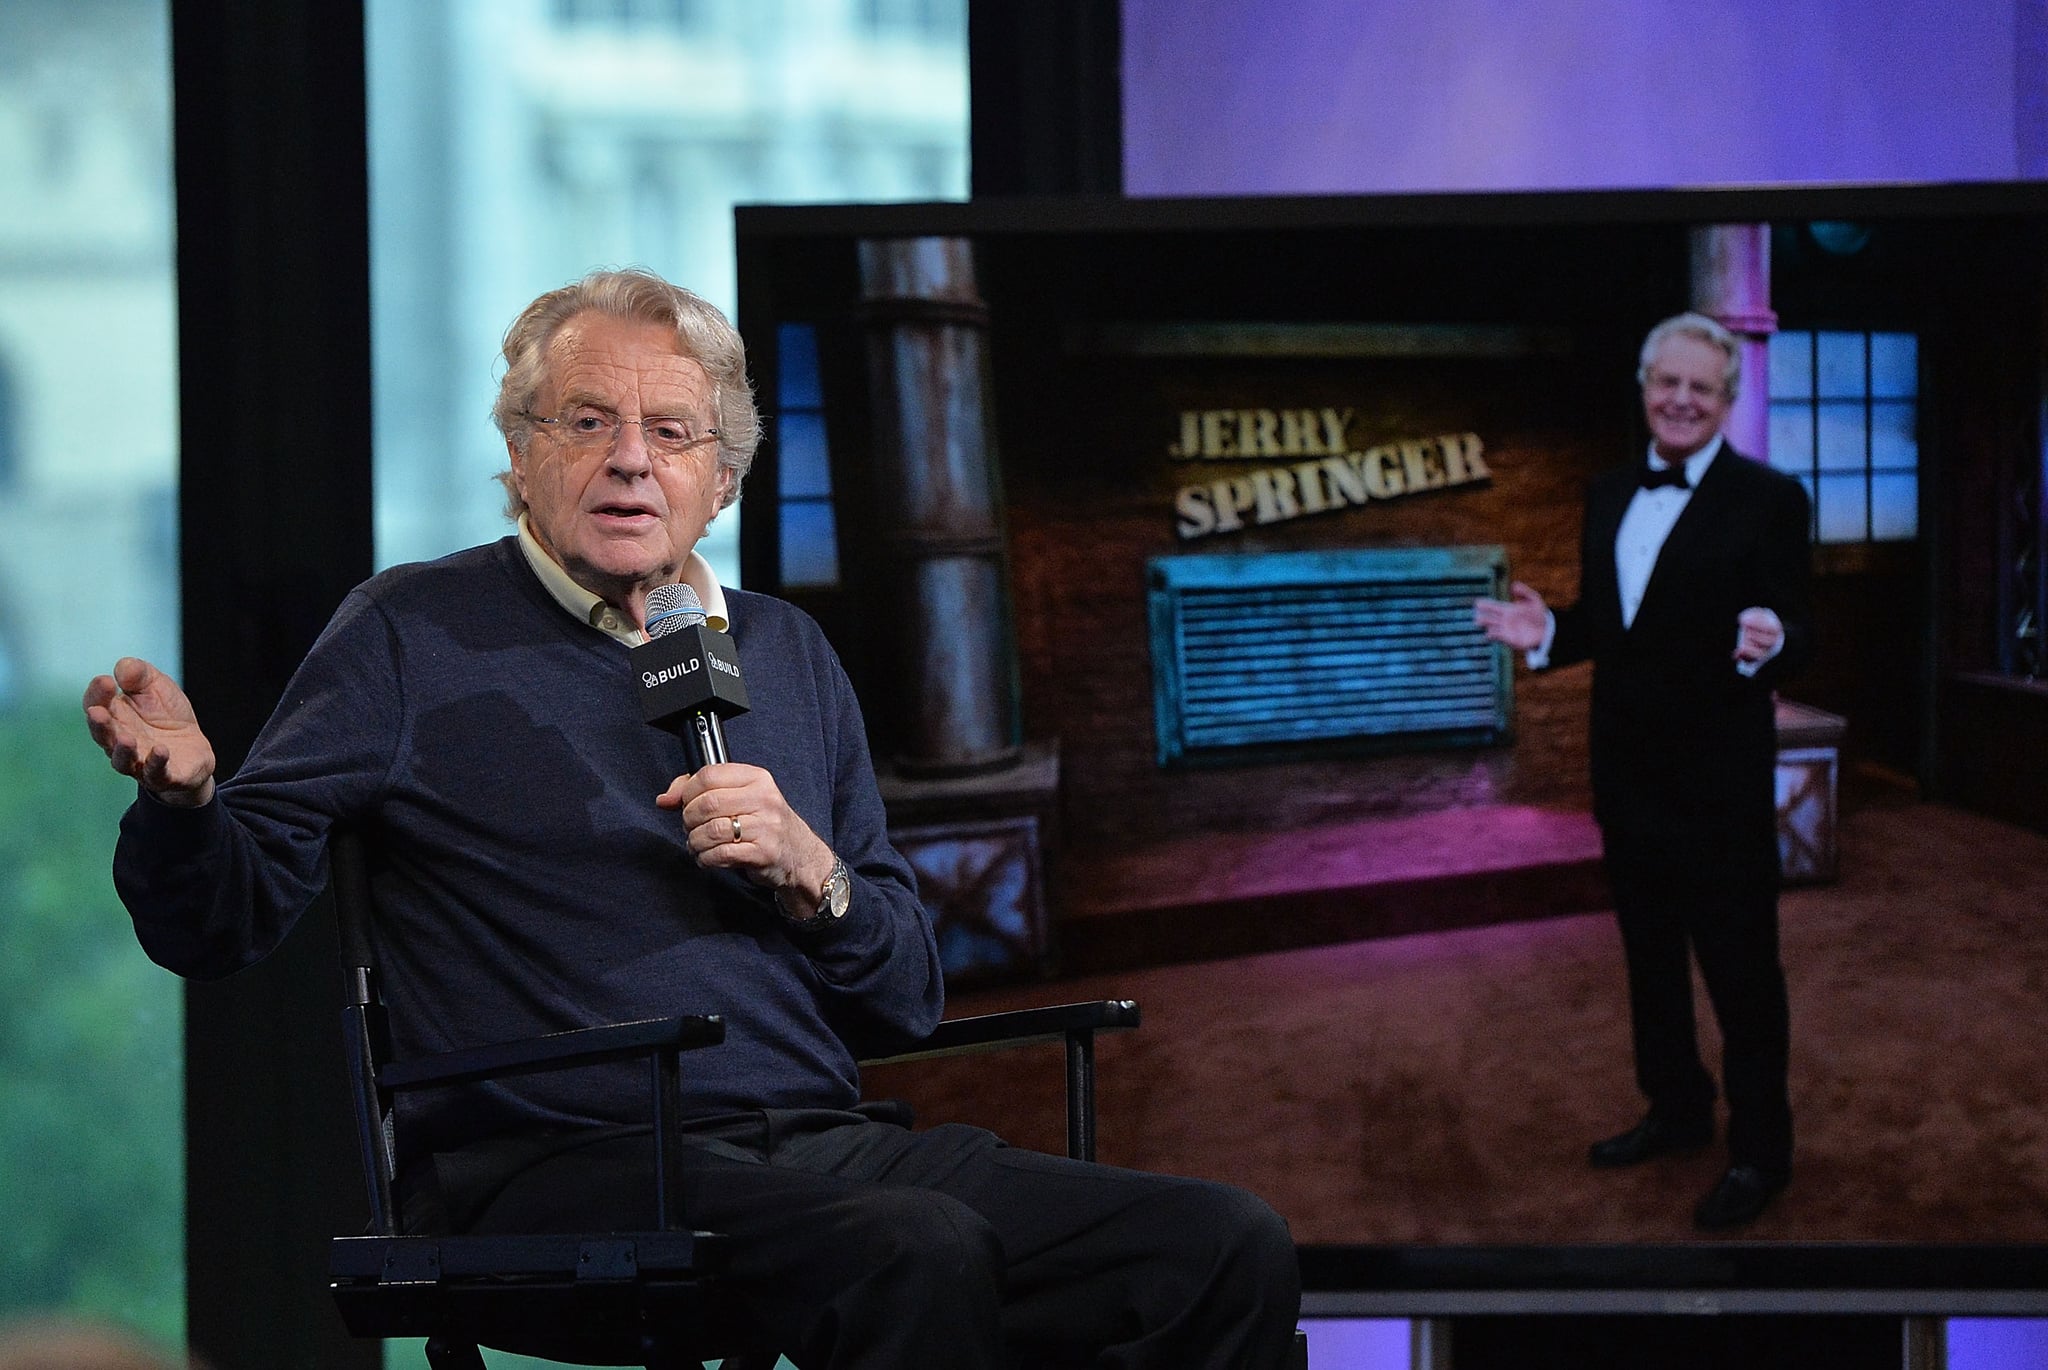 NEW YORK, NY - MAY 19:  Iconic television host Jerry Springer discusses 25 years of his TV show at AOL Build at AOL Studios In New York on May 19, 2016 in New York City.  (Photo by Slaven Vlasic/Getty Images)